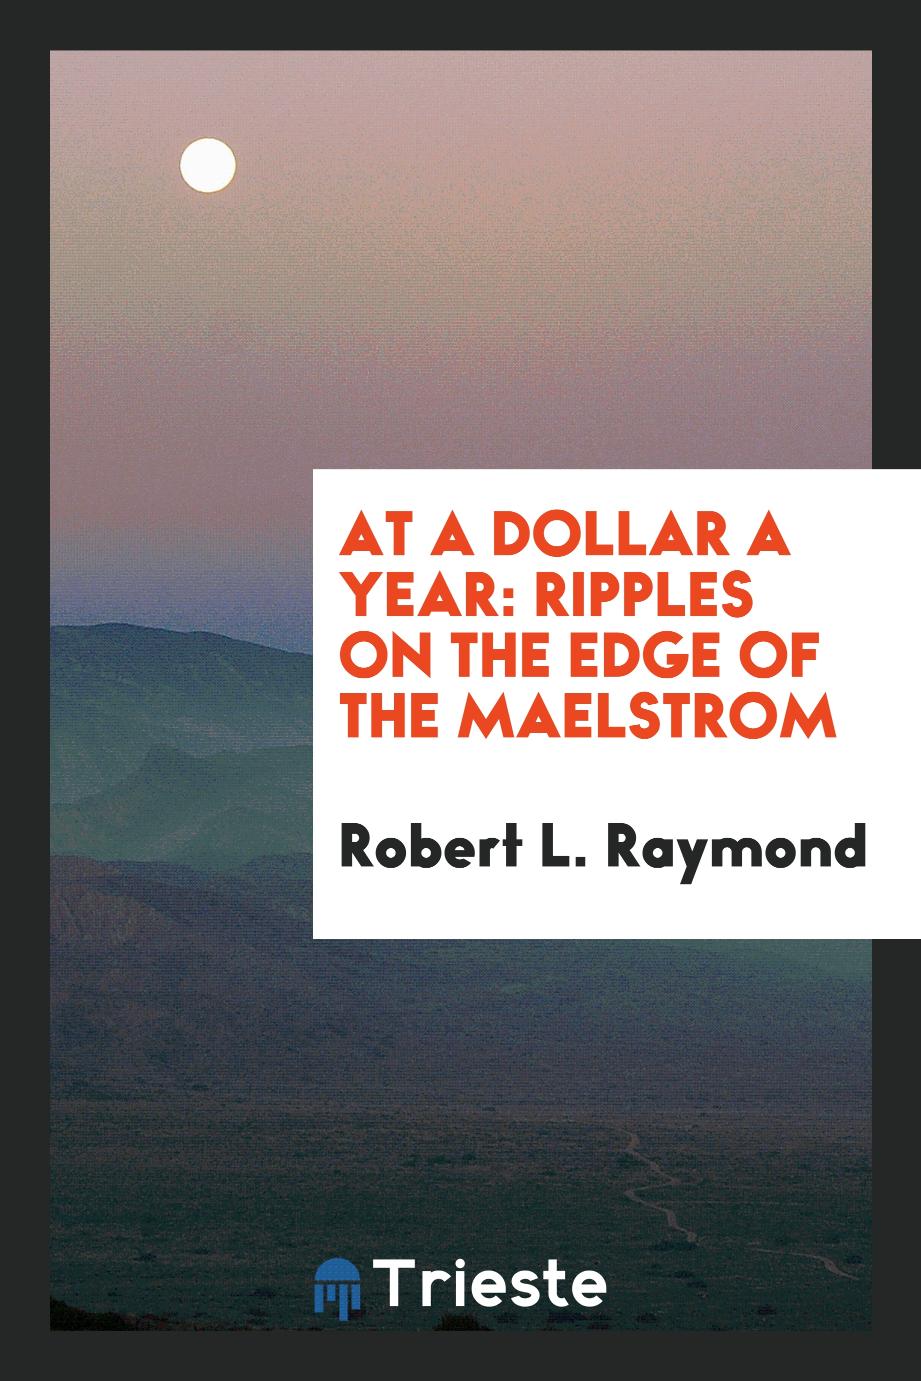 At a dollar a year: ripples on the edge of the maelstrom